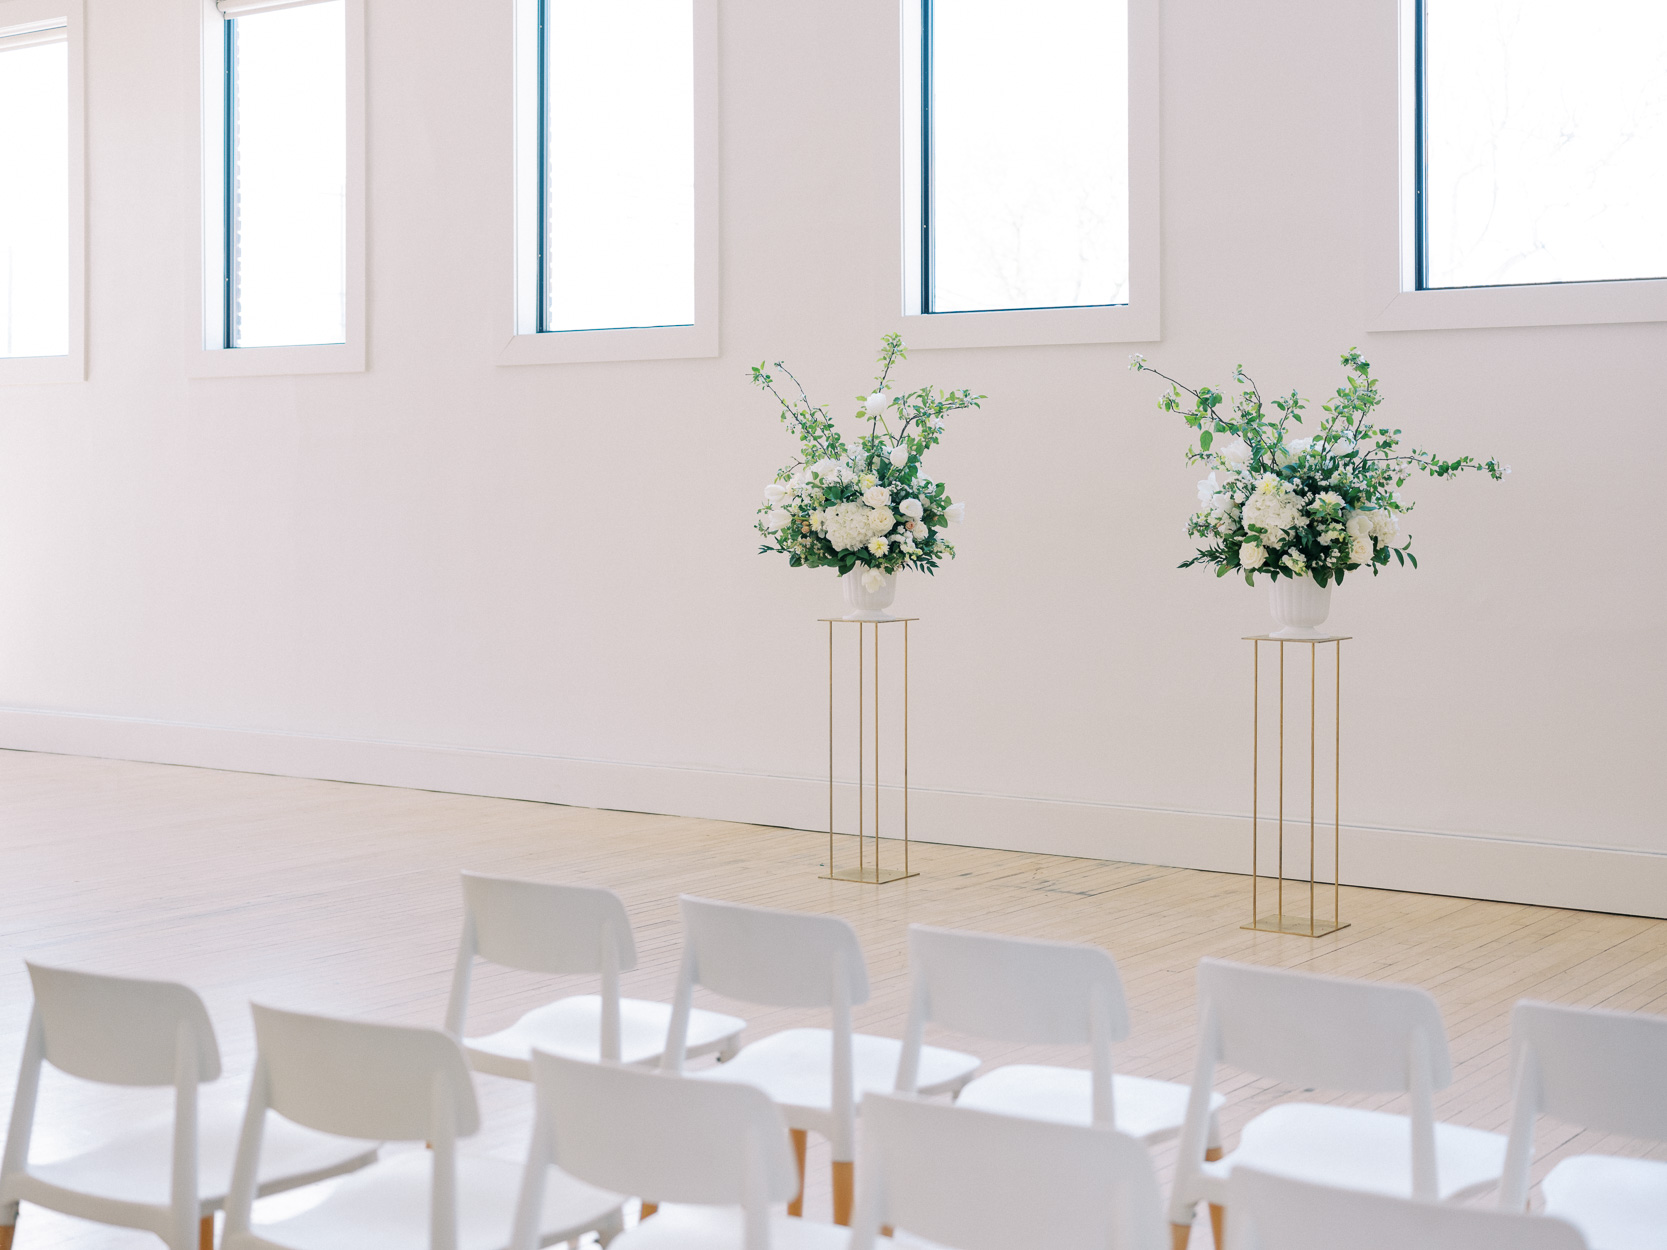 Decorated ceremony space for Gordon Green wedding